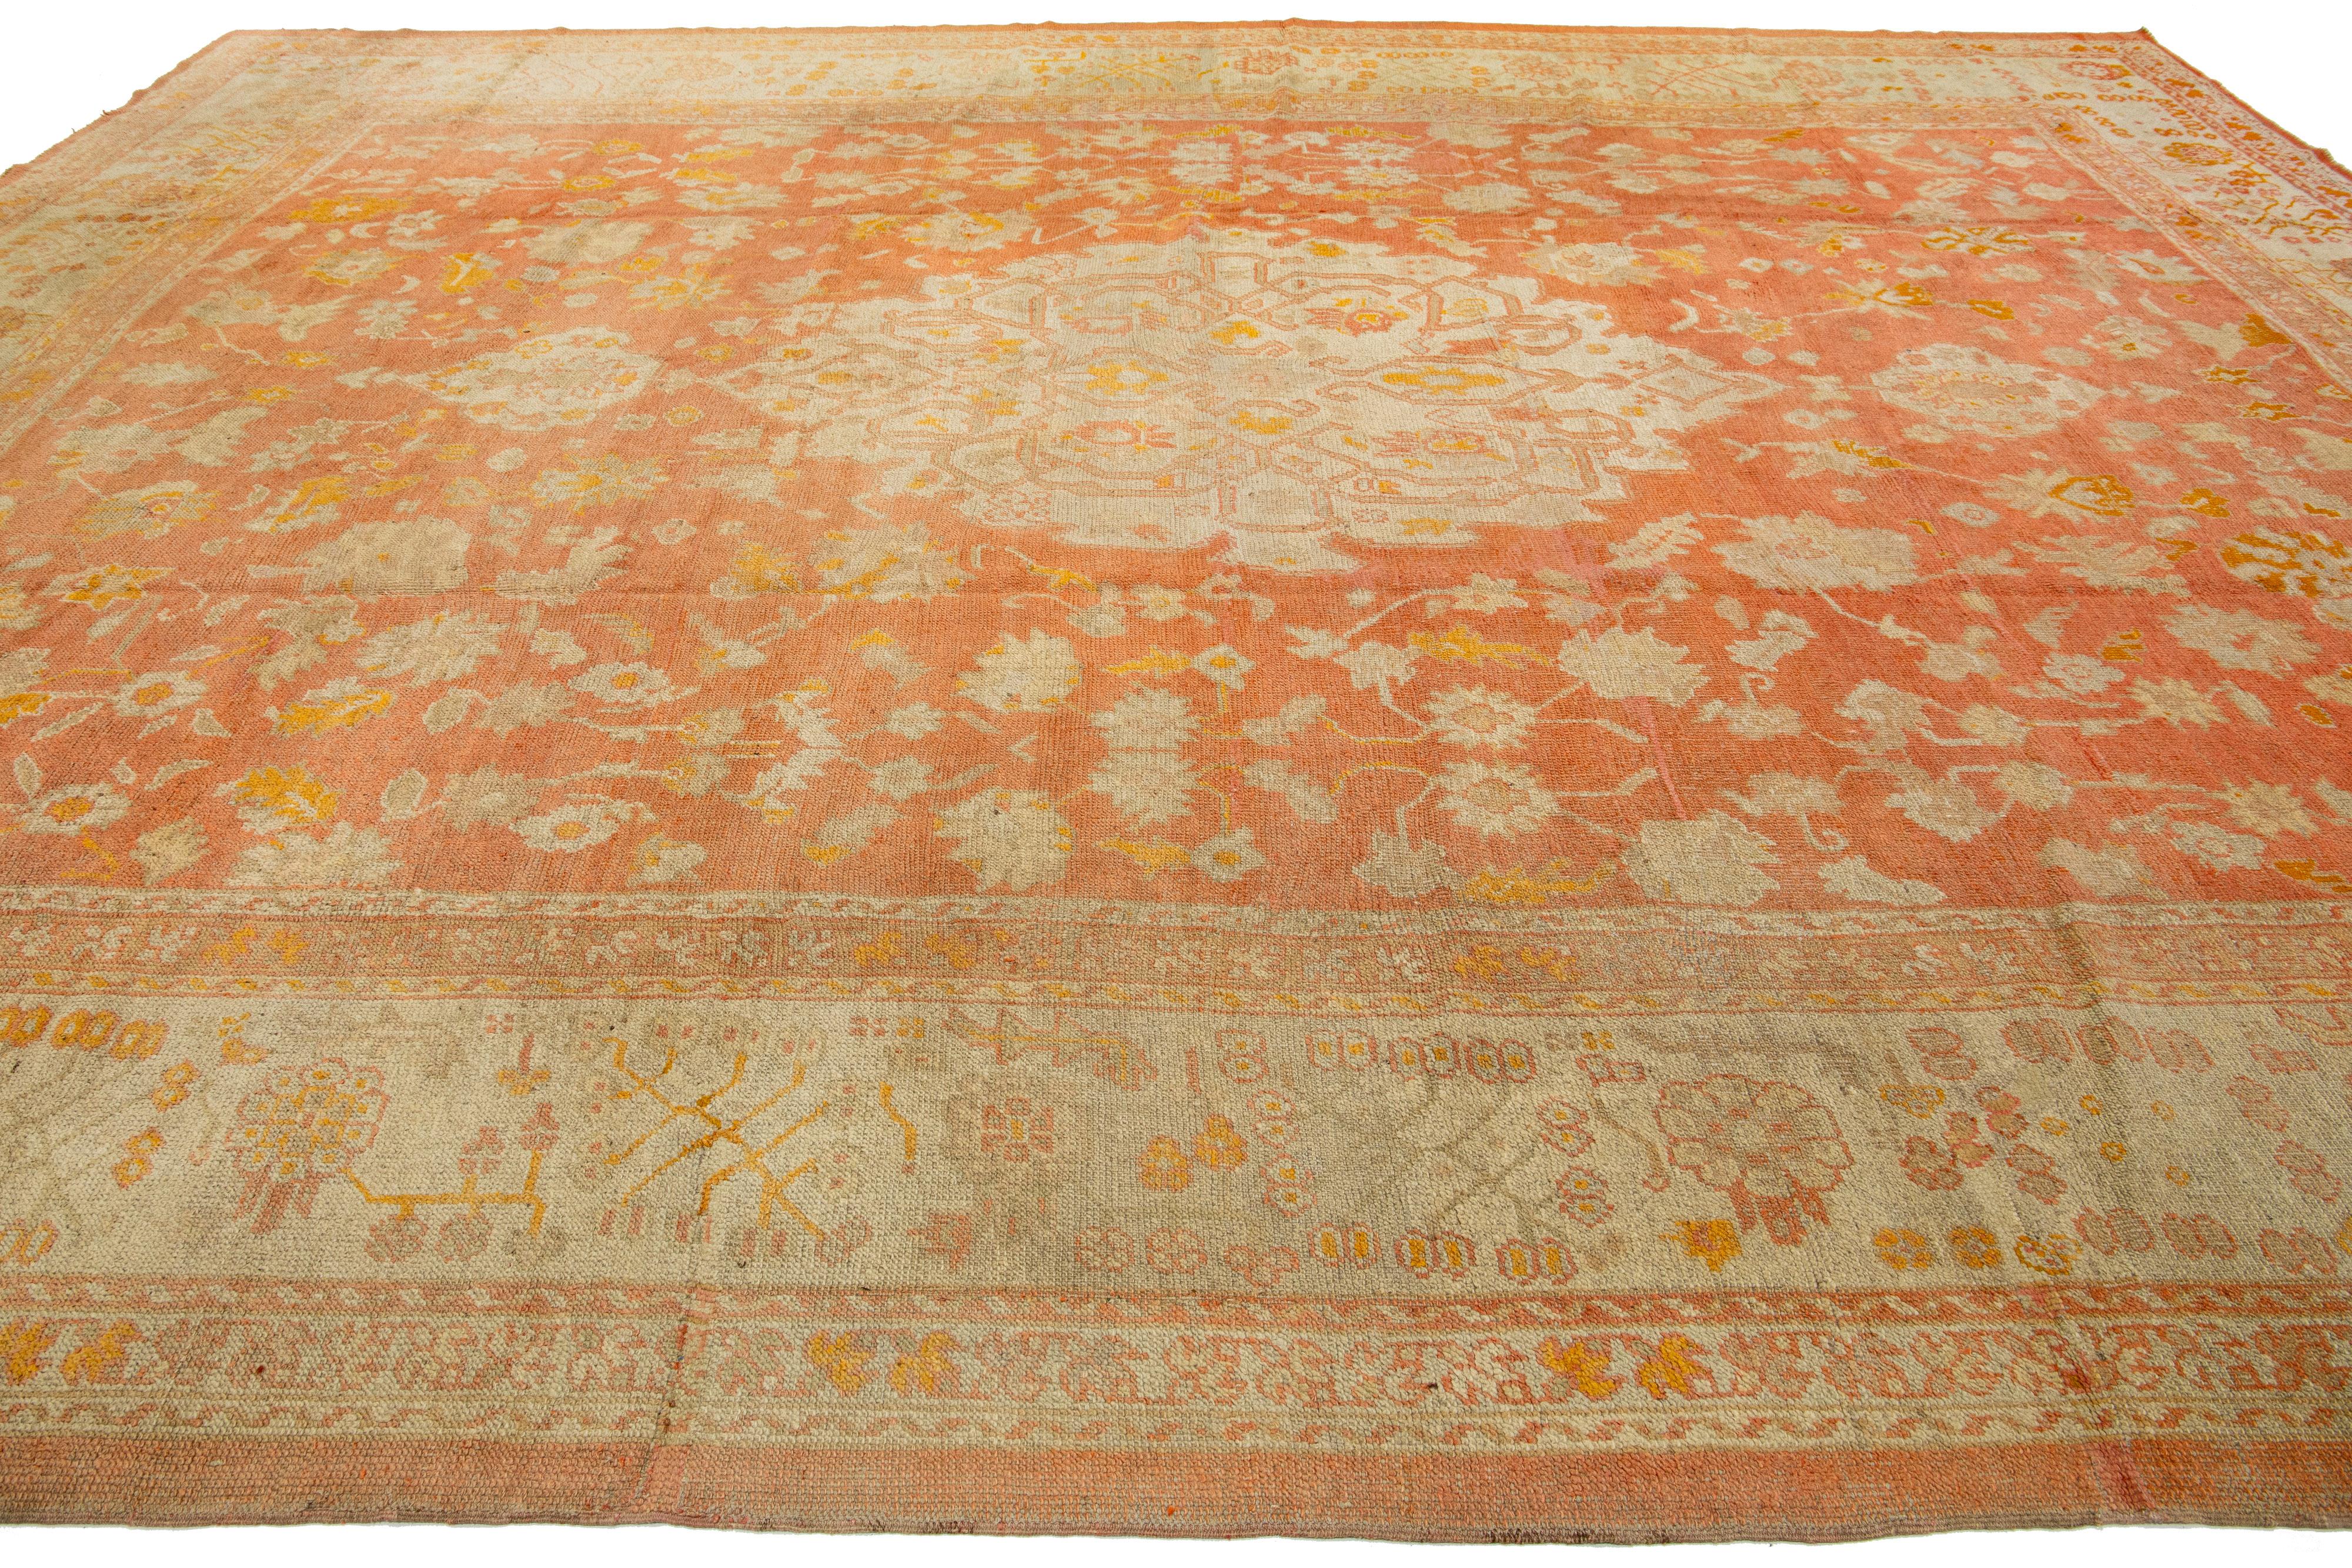 1880's Handmade Orange Turkish Oushak Wool Rug Featuring a Medallion Motif  In Excellent Condition For Sale In Norwalk, CT